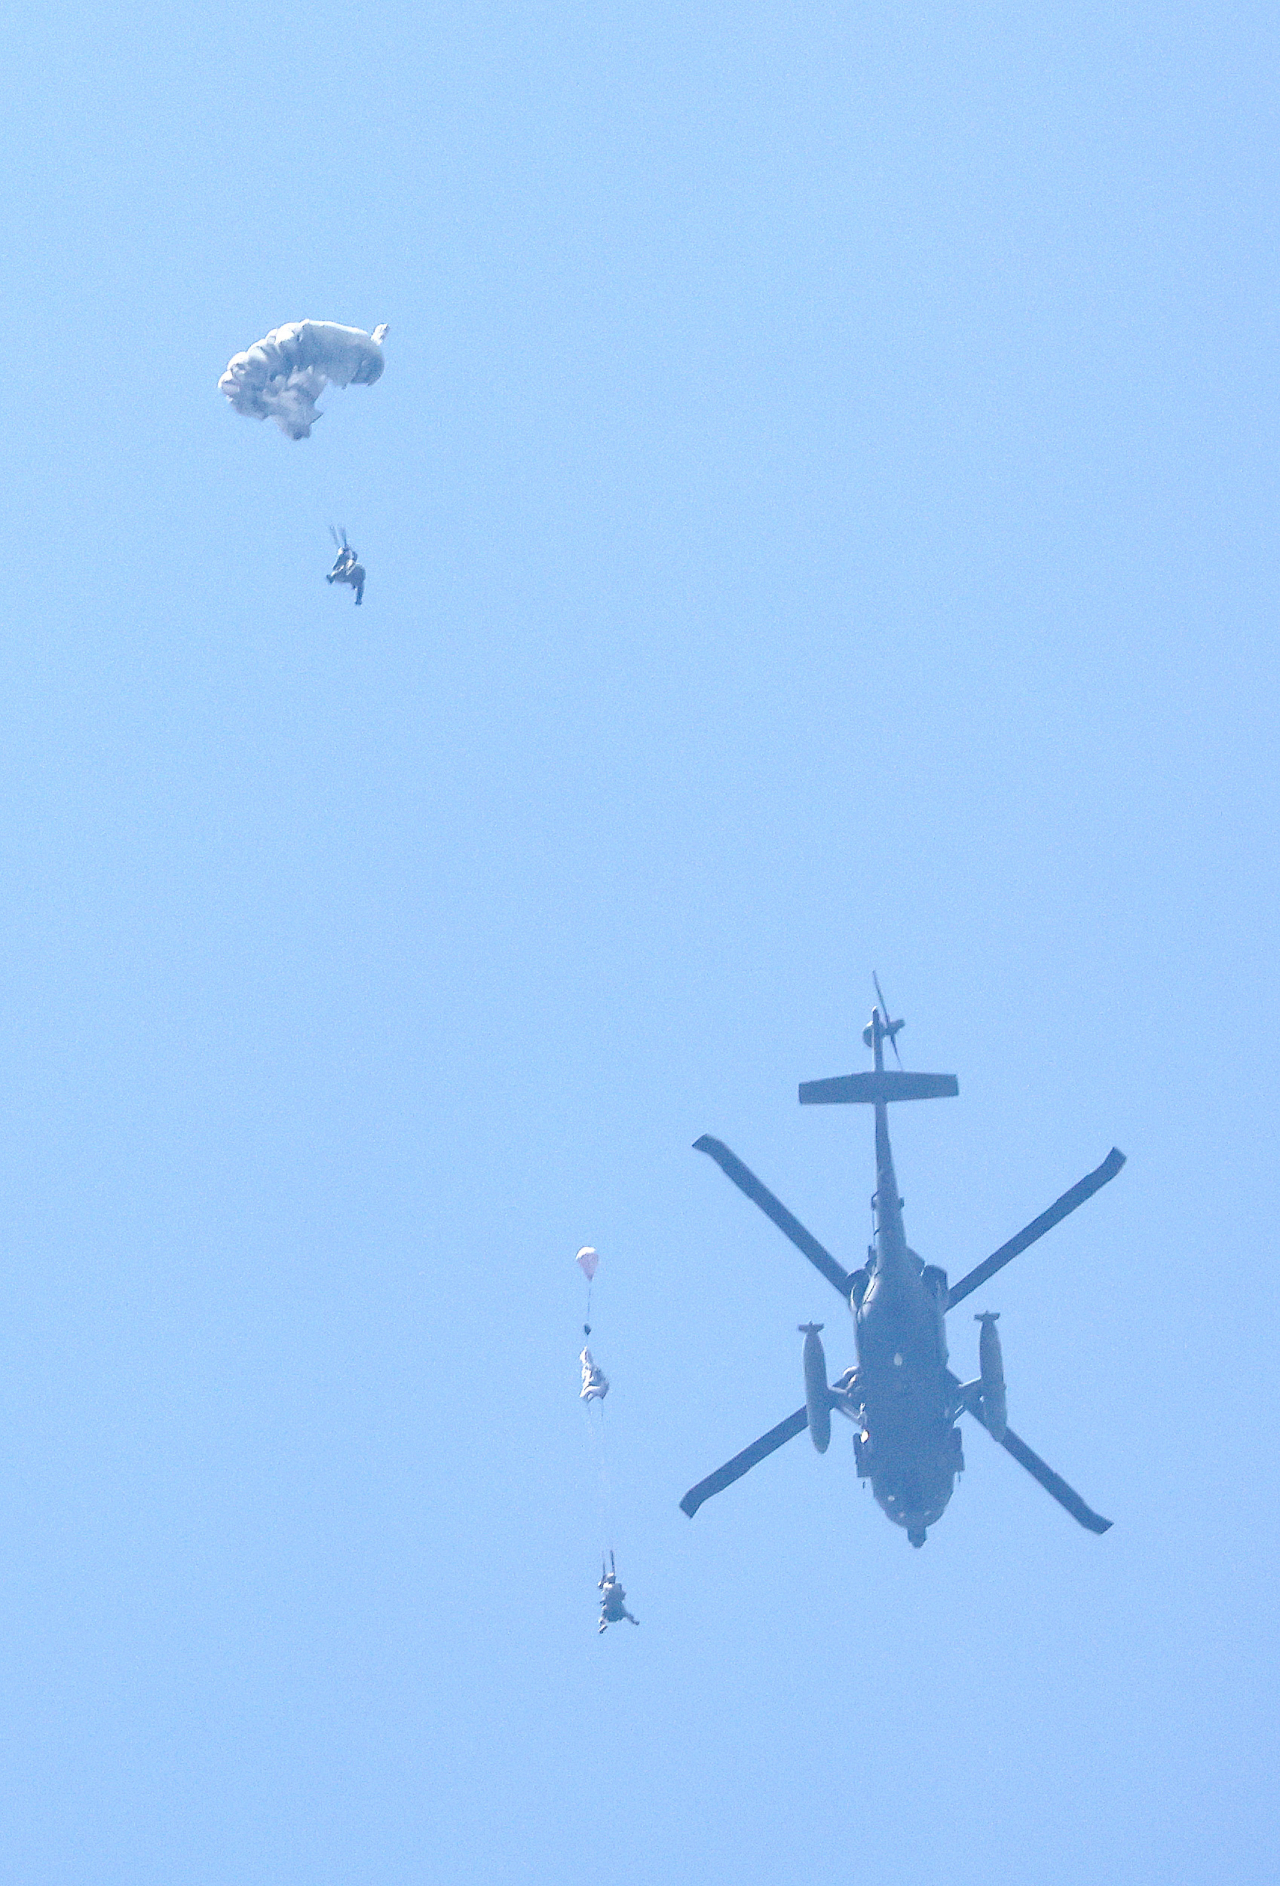 Troops from the 707th Special Mission Group conduct an airborne infiltration exercise above the training grounds of the National Counter-terrorism Training Center in Gwangju, Gyeonggi Province, on Thursday. (Republic of Korea Army)